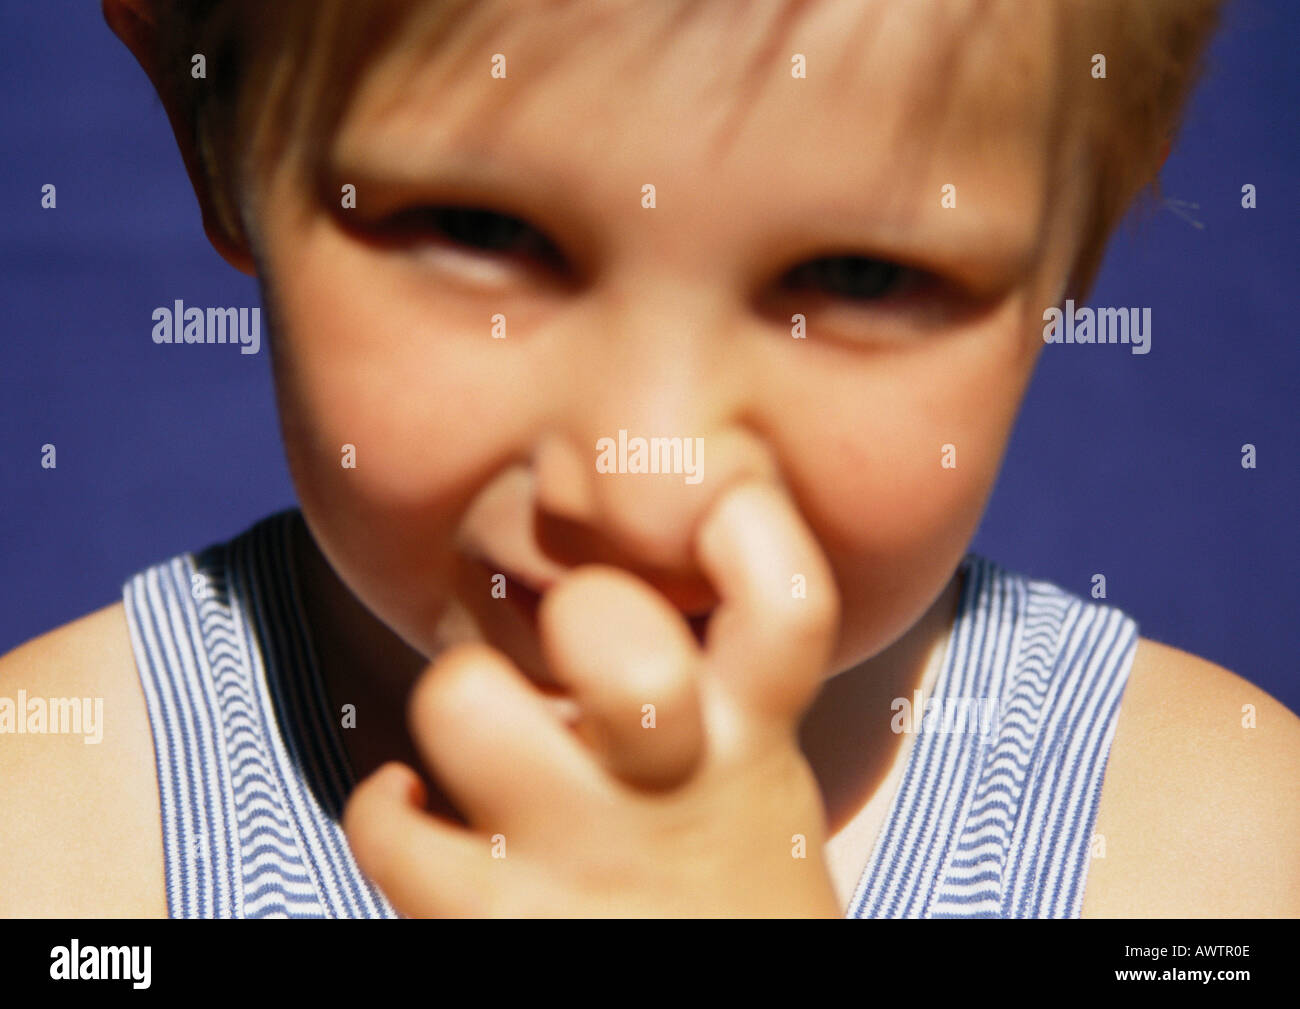 Child with finger in nose, close-up Stock Photo